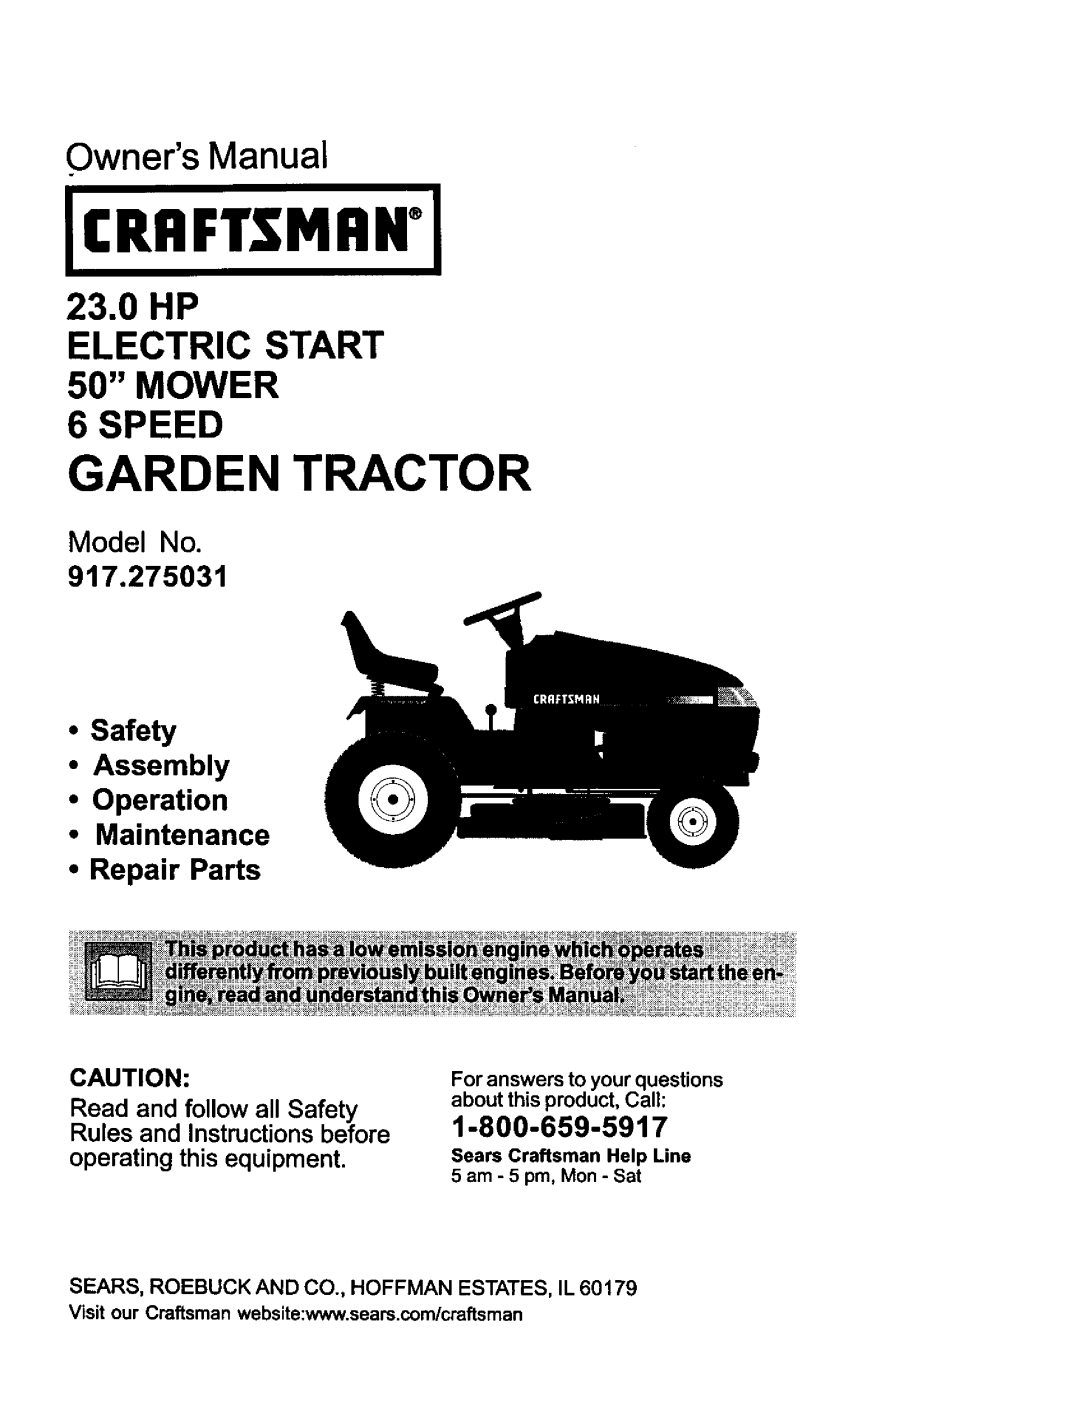 Craftsman 917.275031 owner manual operating this equipment, Sears, Roebuck And Co., Hoffman Estates, Il, Jcriiftsmi Hj 